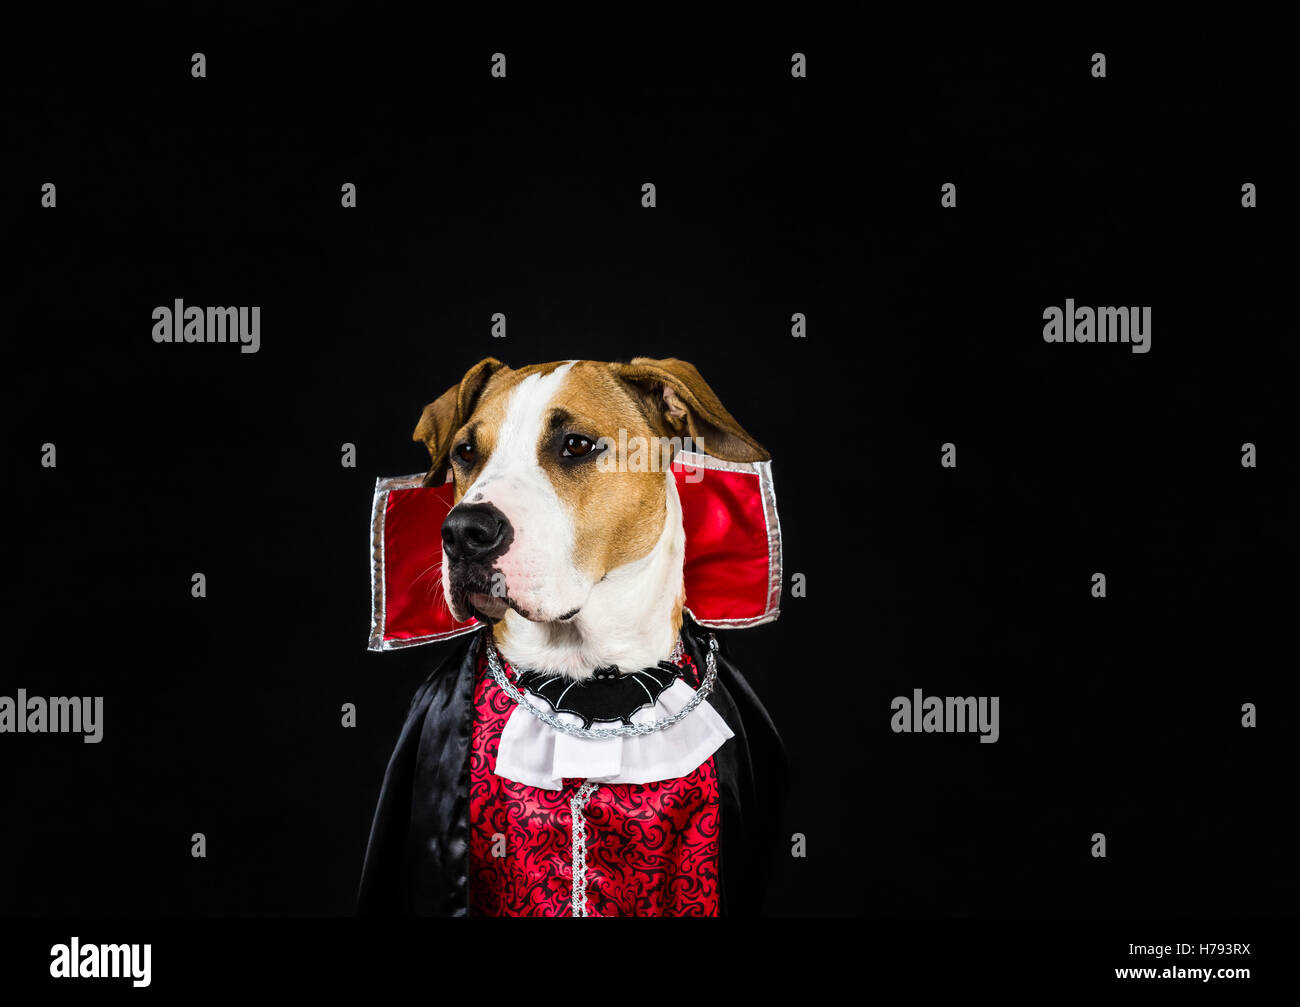 Dog in halloween vampire costume. Puppy dressed up for halloween in a vampire outfit posing in front of dark background Stock Photo